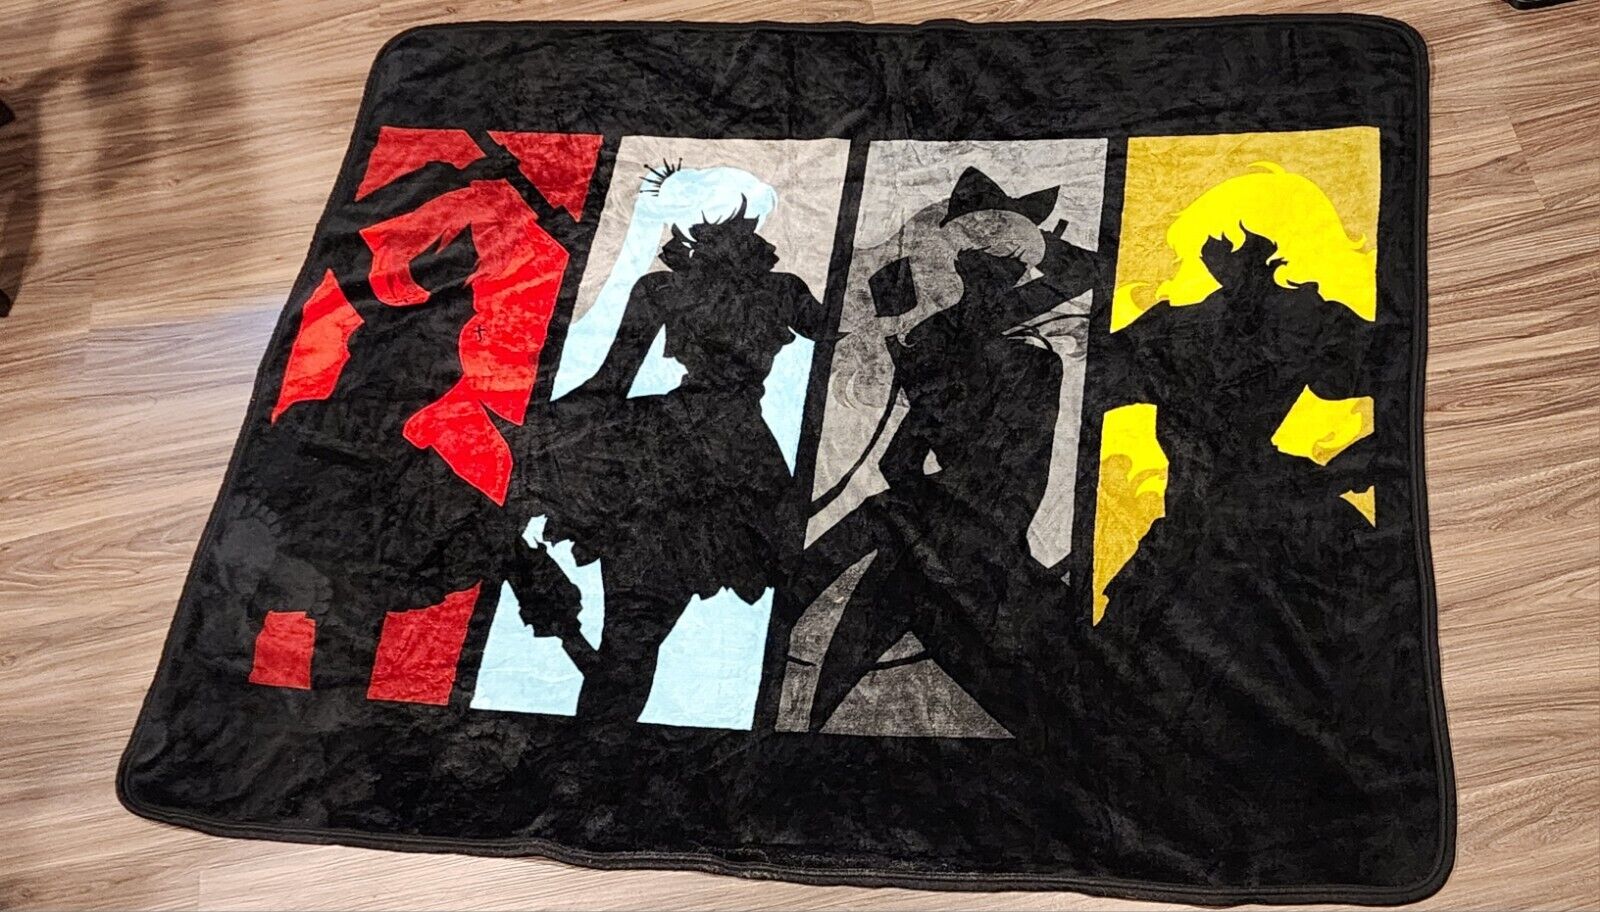 OFFICIAL RARE LICENSED RWBY Throw Blanket Rooster Teeth Team RWBY OUT OF PRINT